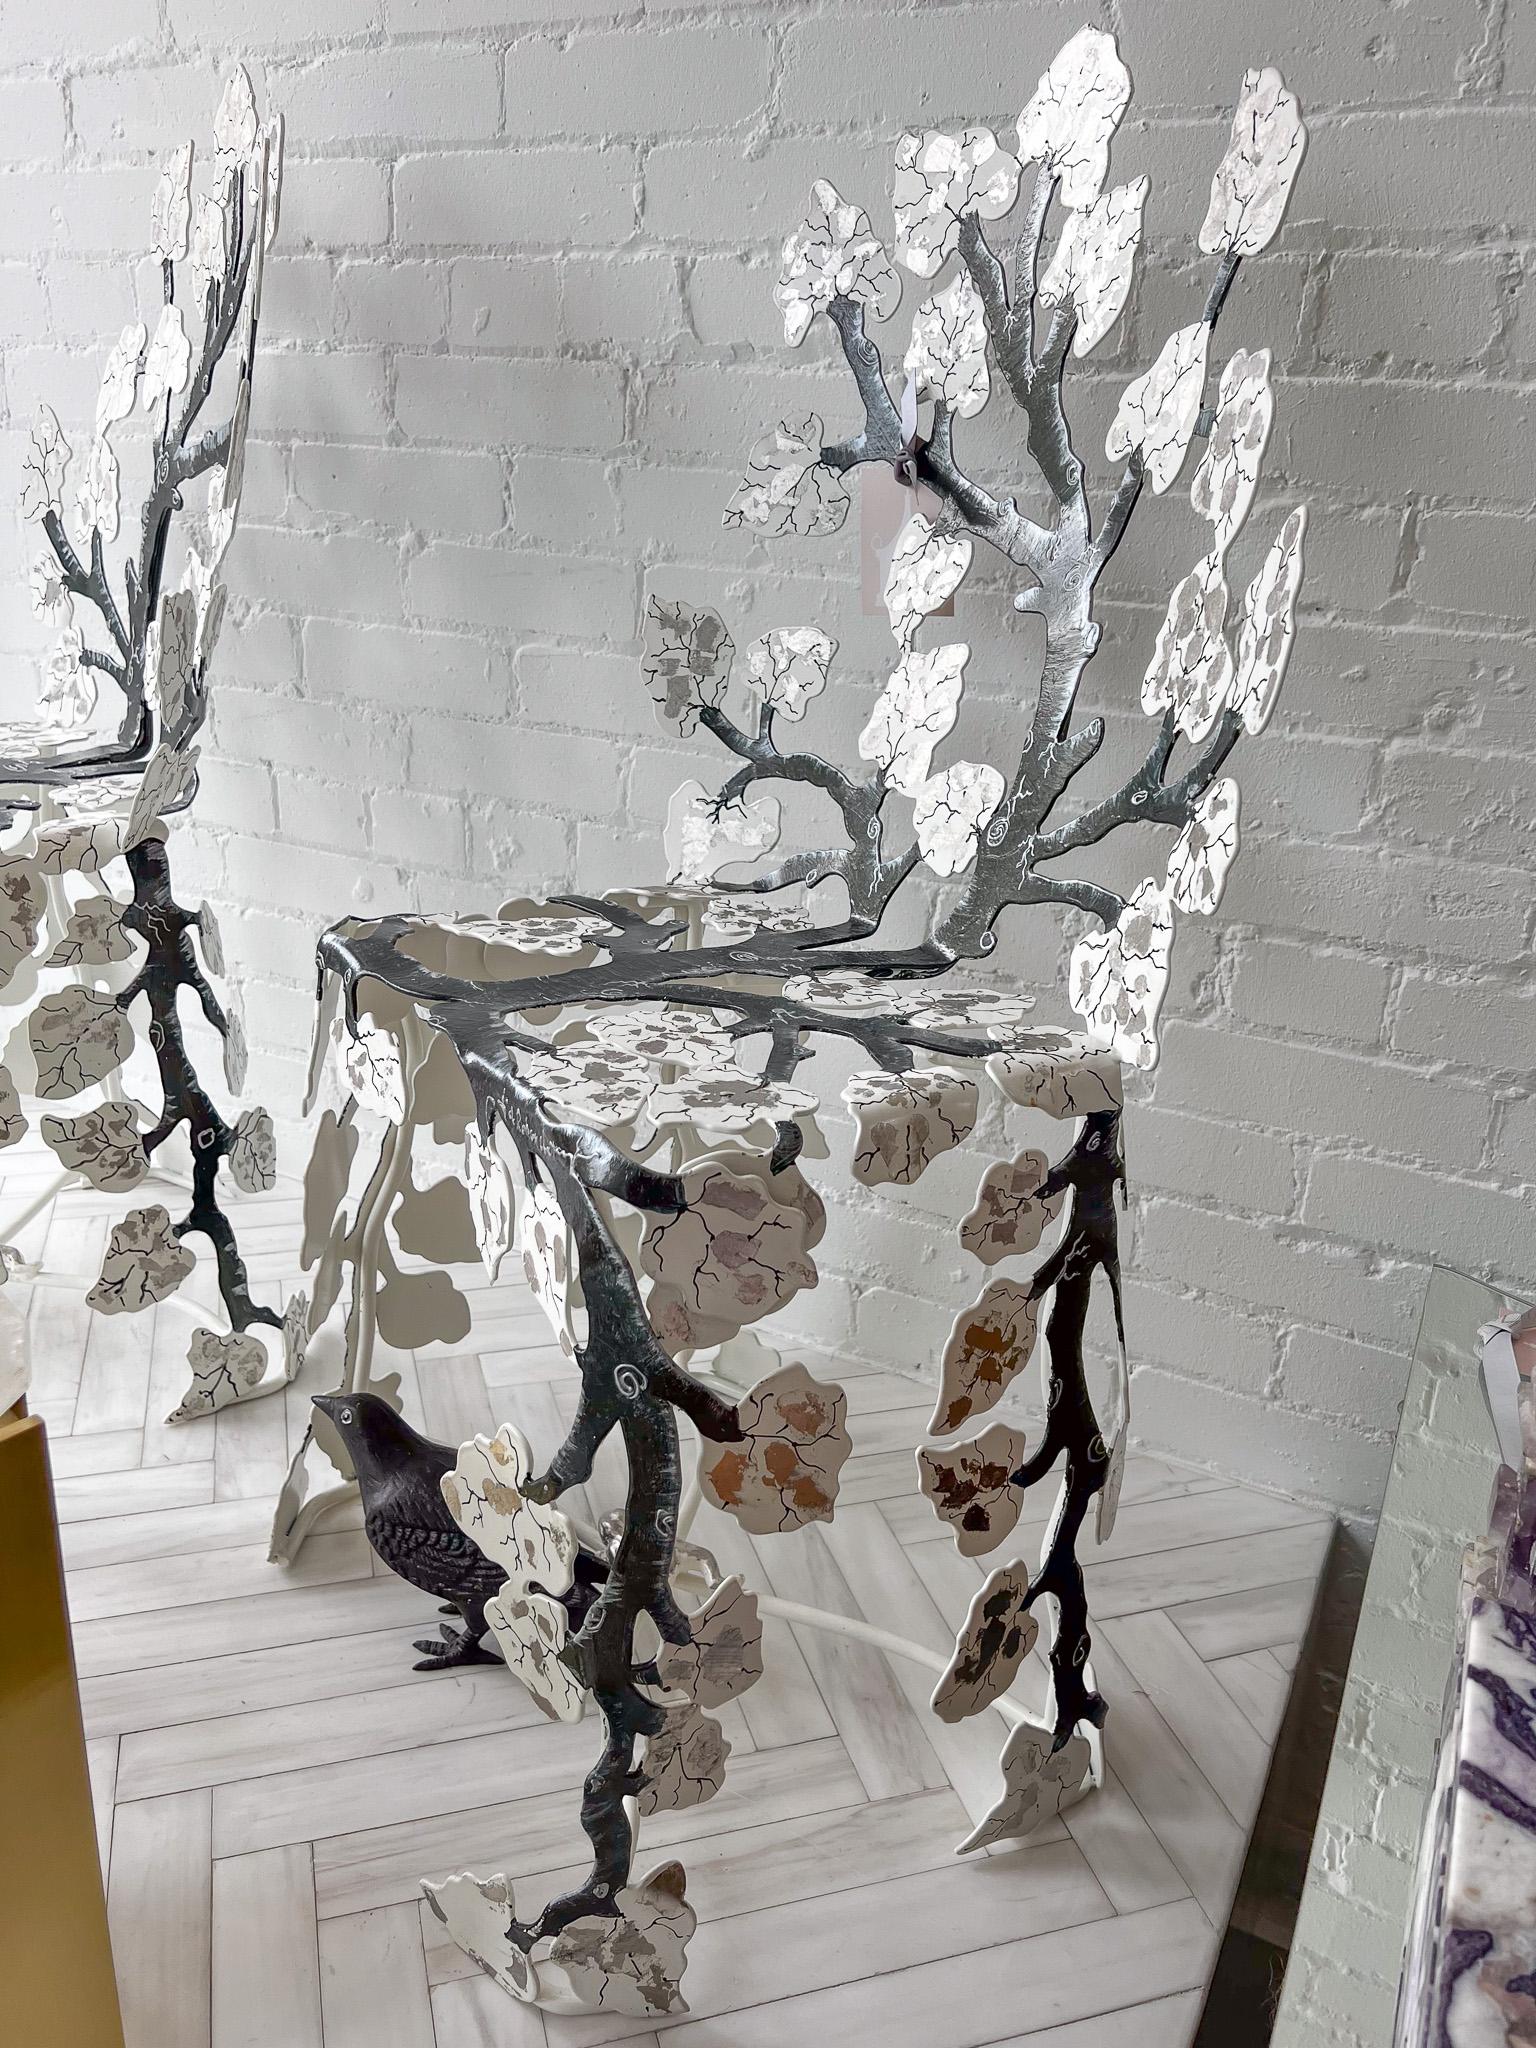 A stunning handmade sculptural chair be renowned French artist, Joy De Rohan Chabot. The Winter Chair is a beautiful example how a cold bare tree can be the perfect canvas for fresh fallen snow. Hand forged and painted by the artist, each chair is